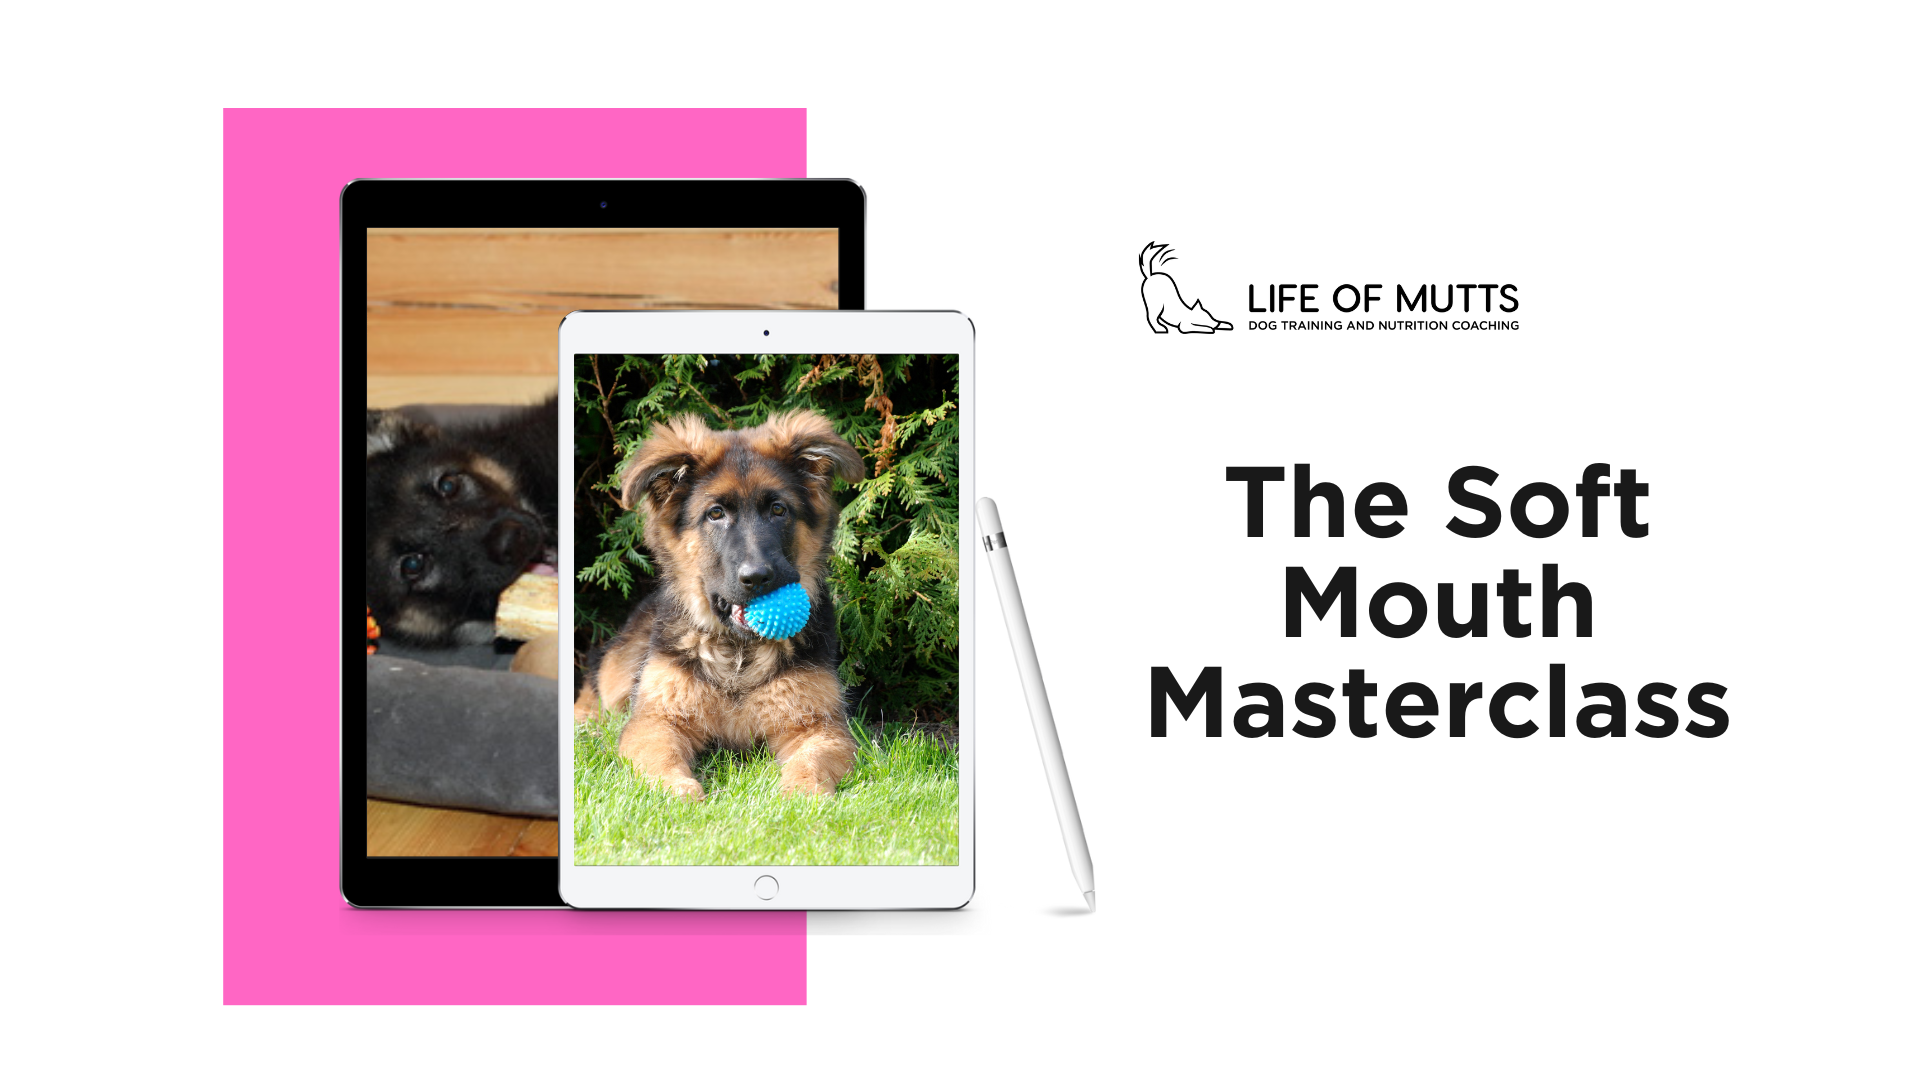 The Soft Mouth Masterclass for German Shepherd Puppies